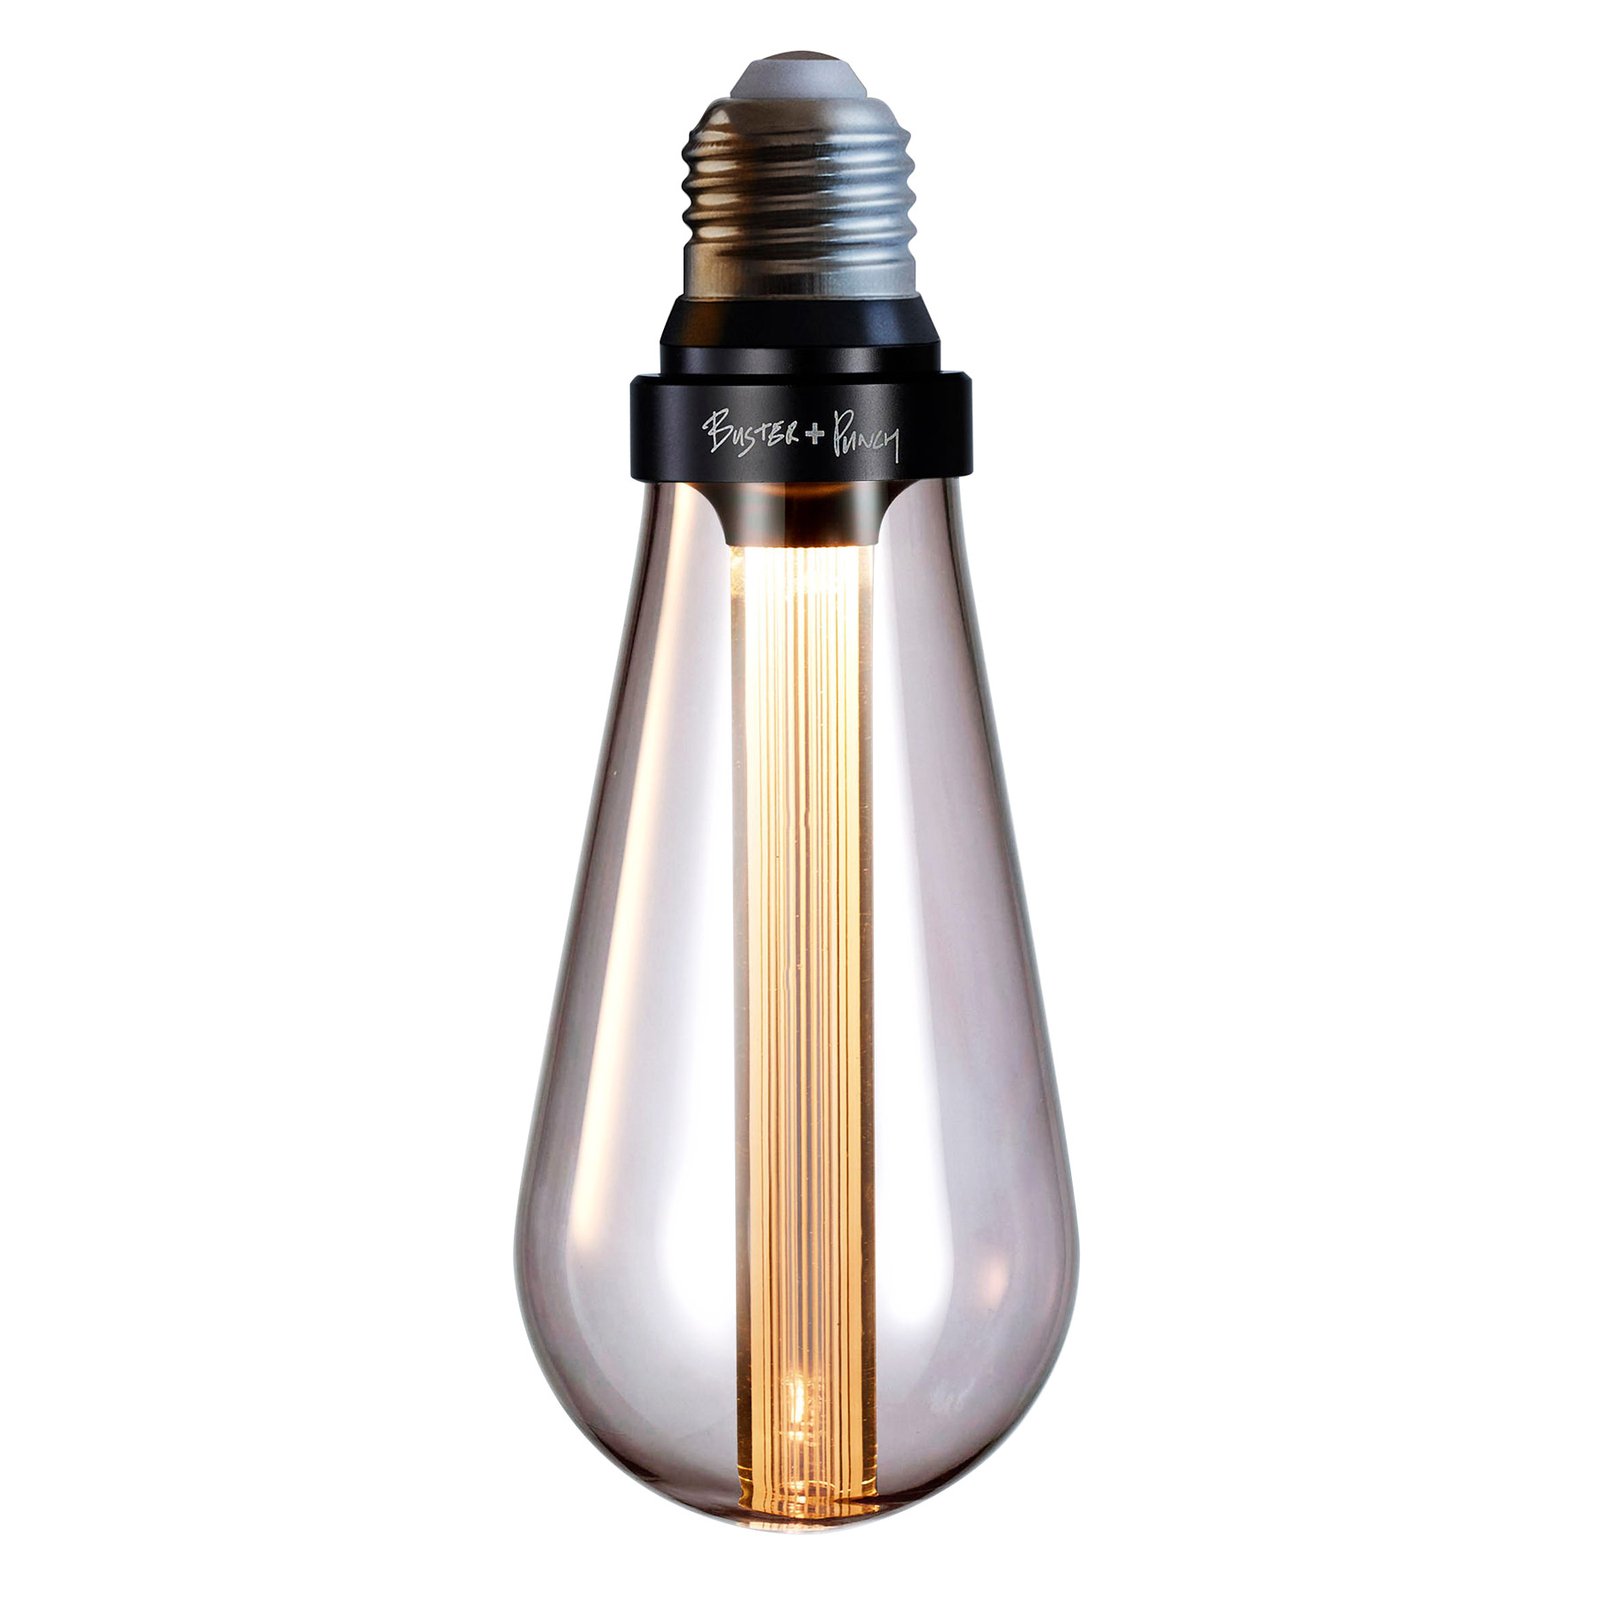 Buster + Punch LED-pære E27 2W dimbar smoked